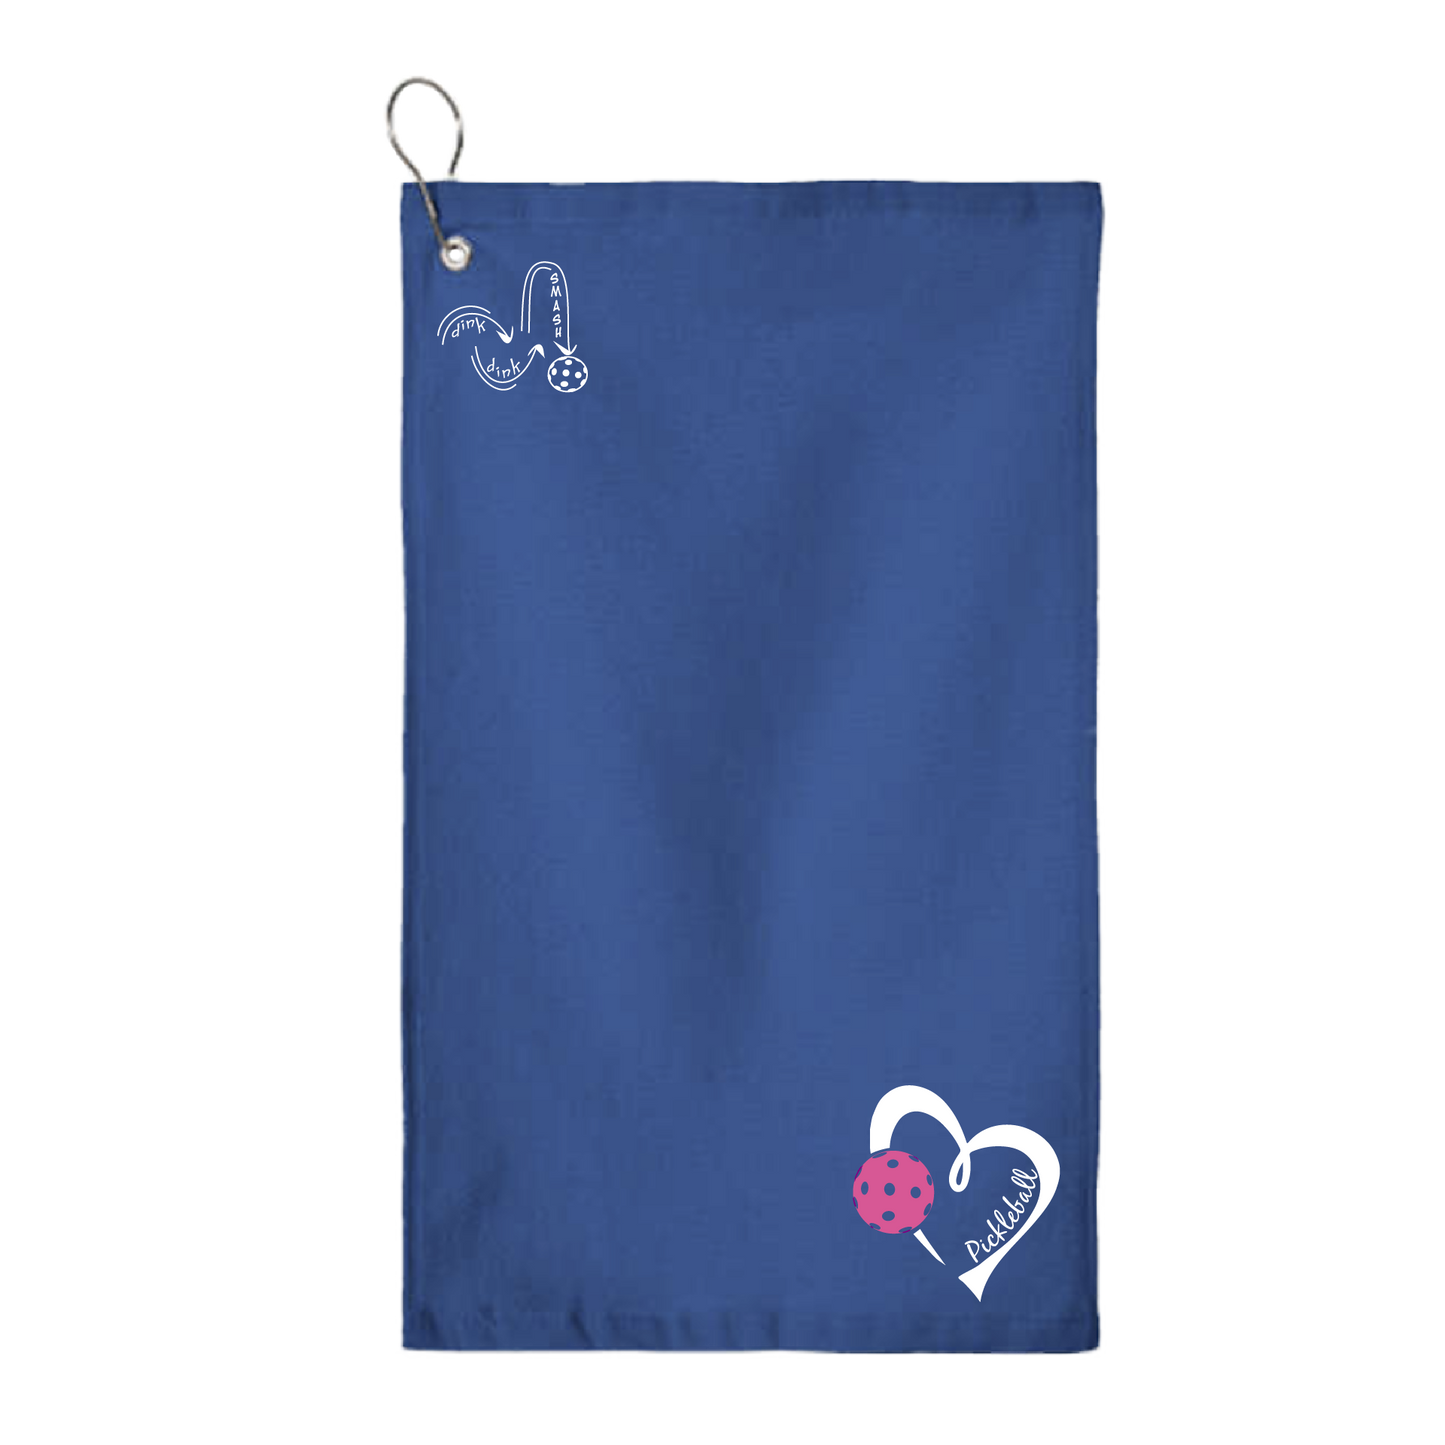 This Pickleball Love Heart and Pink Pickleball towel is crafted with cotton terry velour for optimal performance. It features grommets, hooks, and hemmed edges for added durability. It's perfect for completing your pickleball gear, and an ideal gift for friends and tournaments. The towel is designed to be both absorbent and lightweight, so you can remain dry and comfortable while you play.